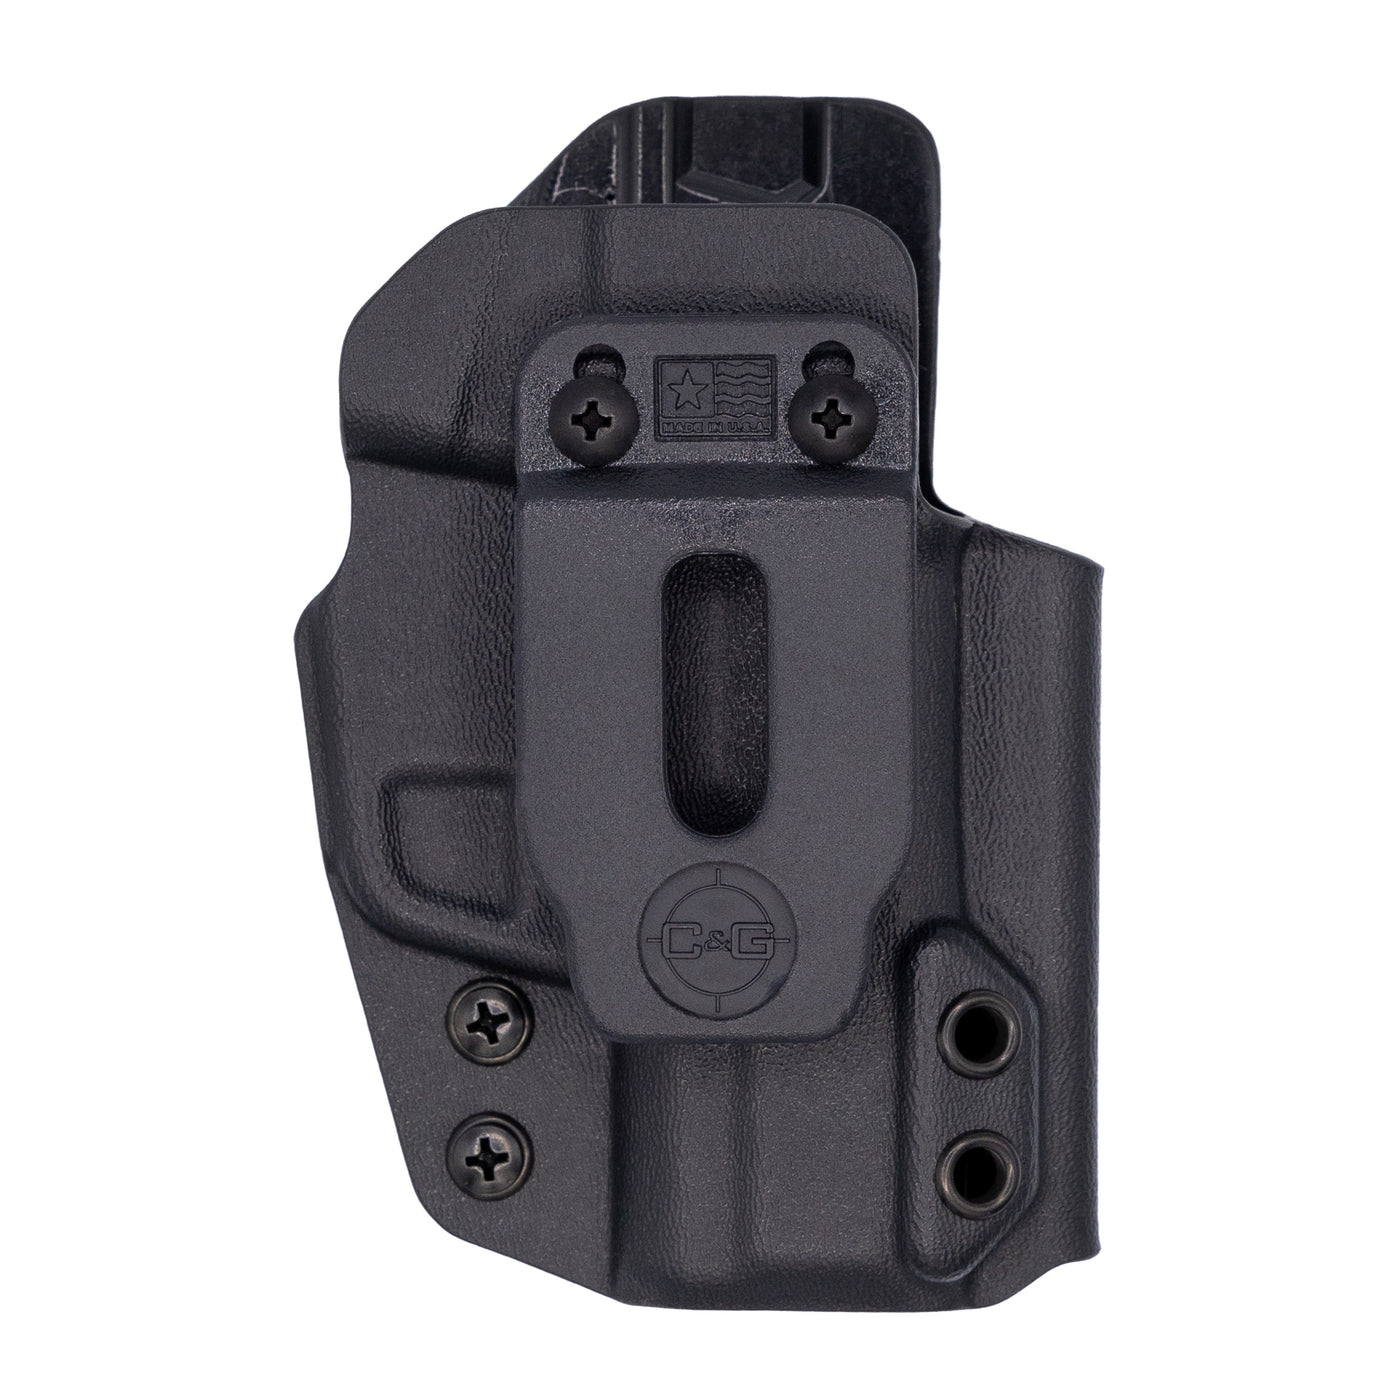 Shown is the custom C&G Holsters IWB inside the waistband Holster for the Ruger MAX9.